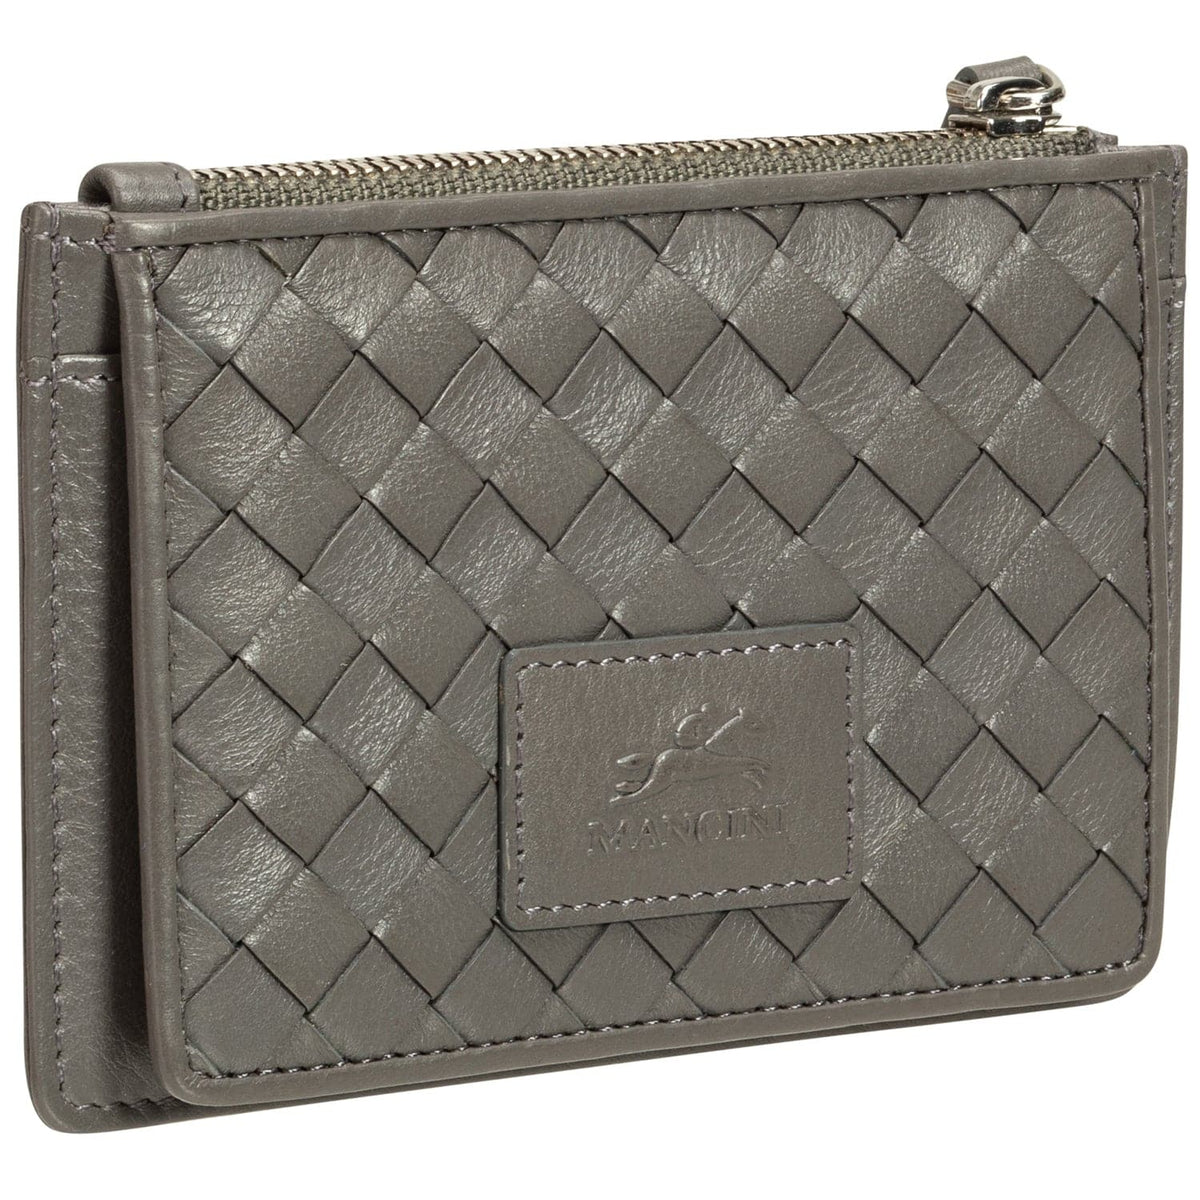 Mancini Basket Weave RFID Secure Card Case and Coin Pocket